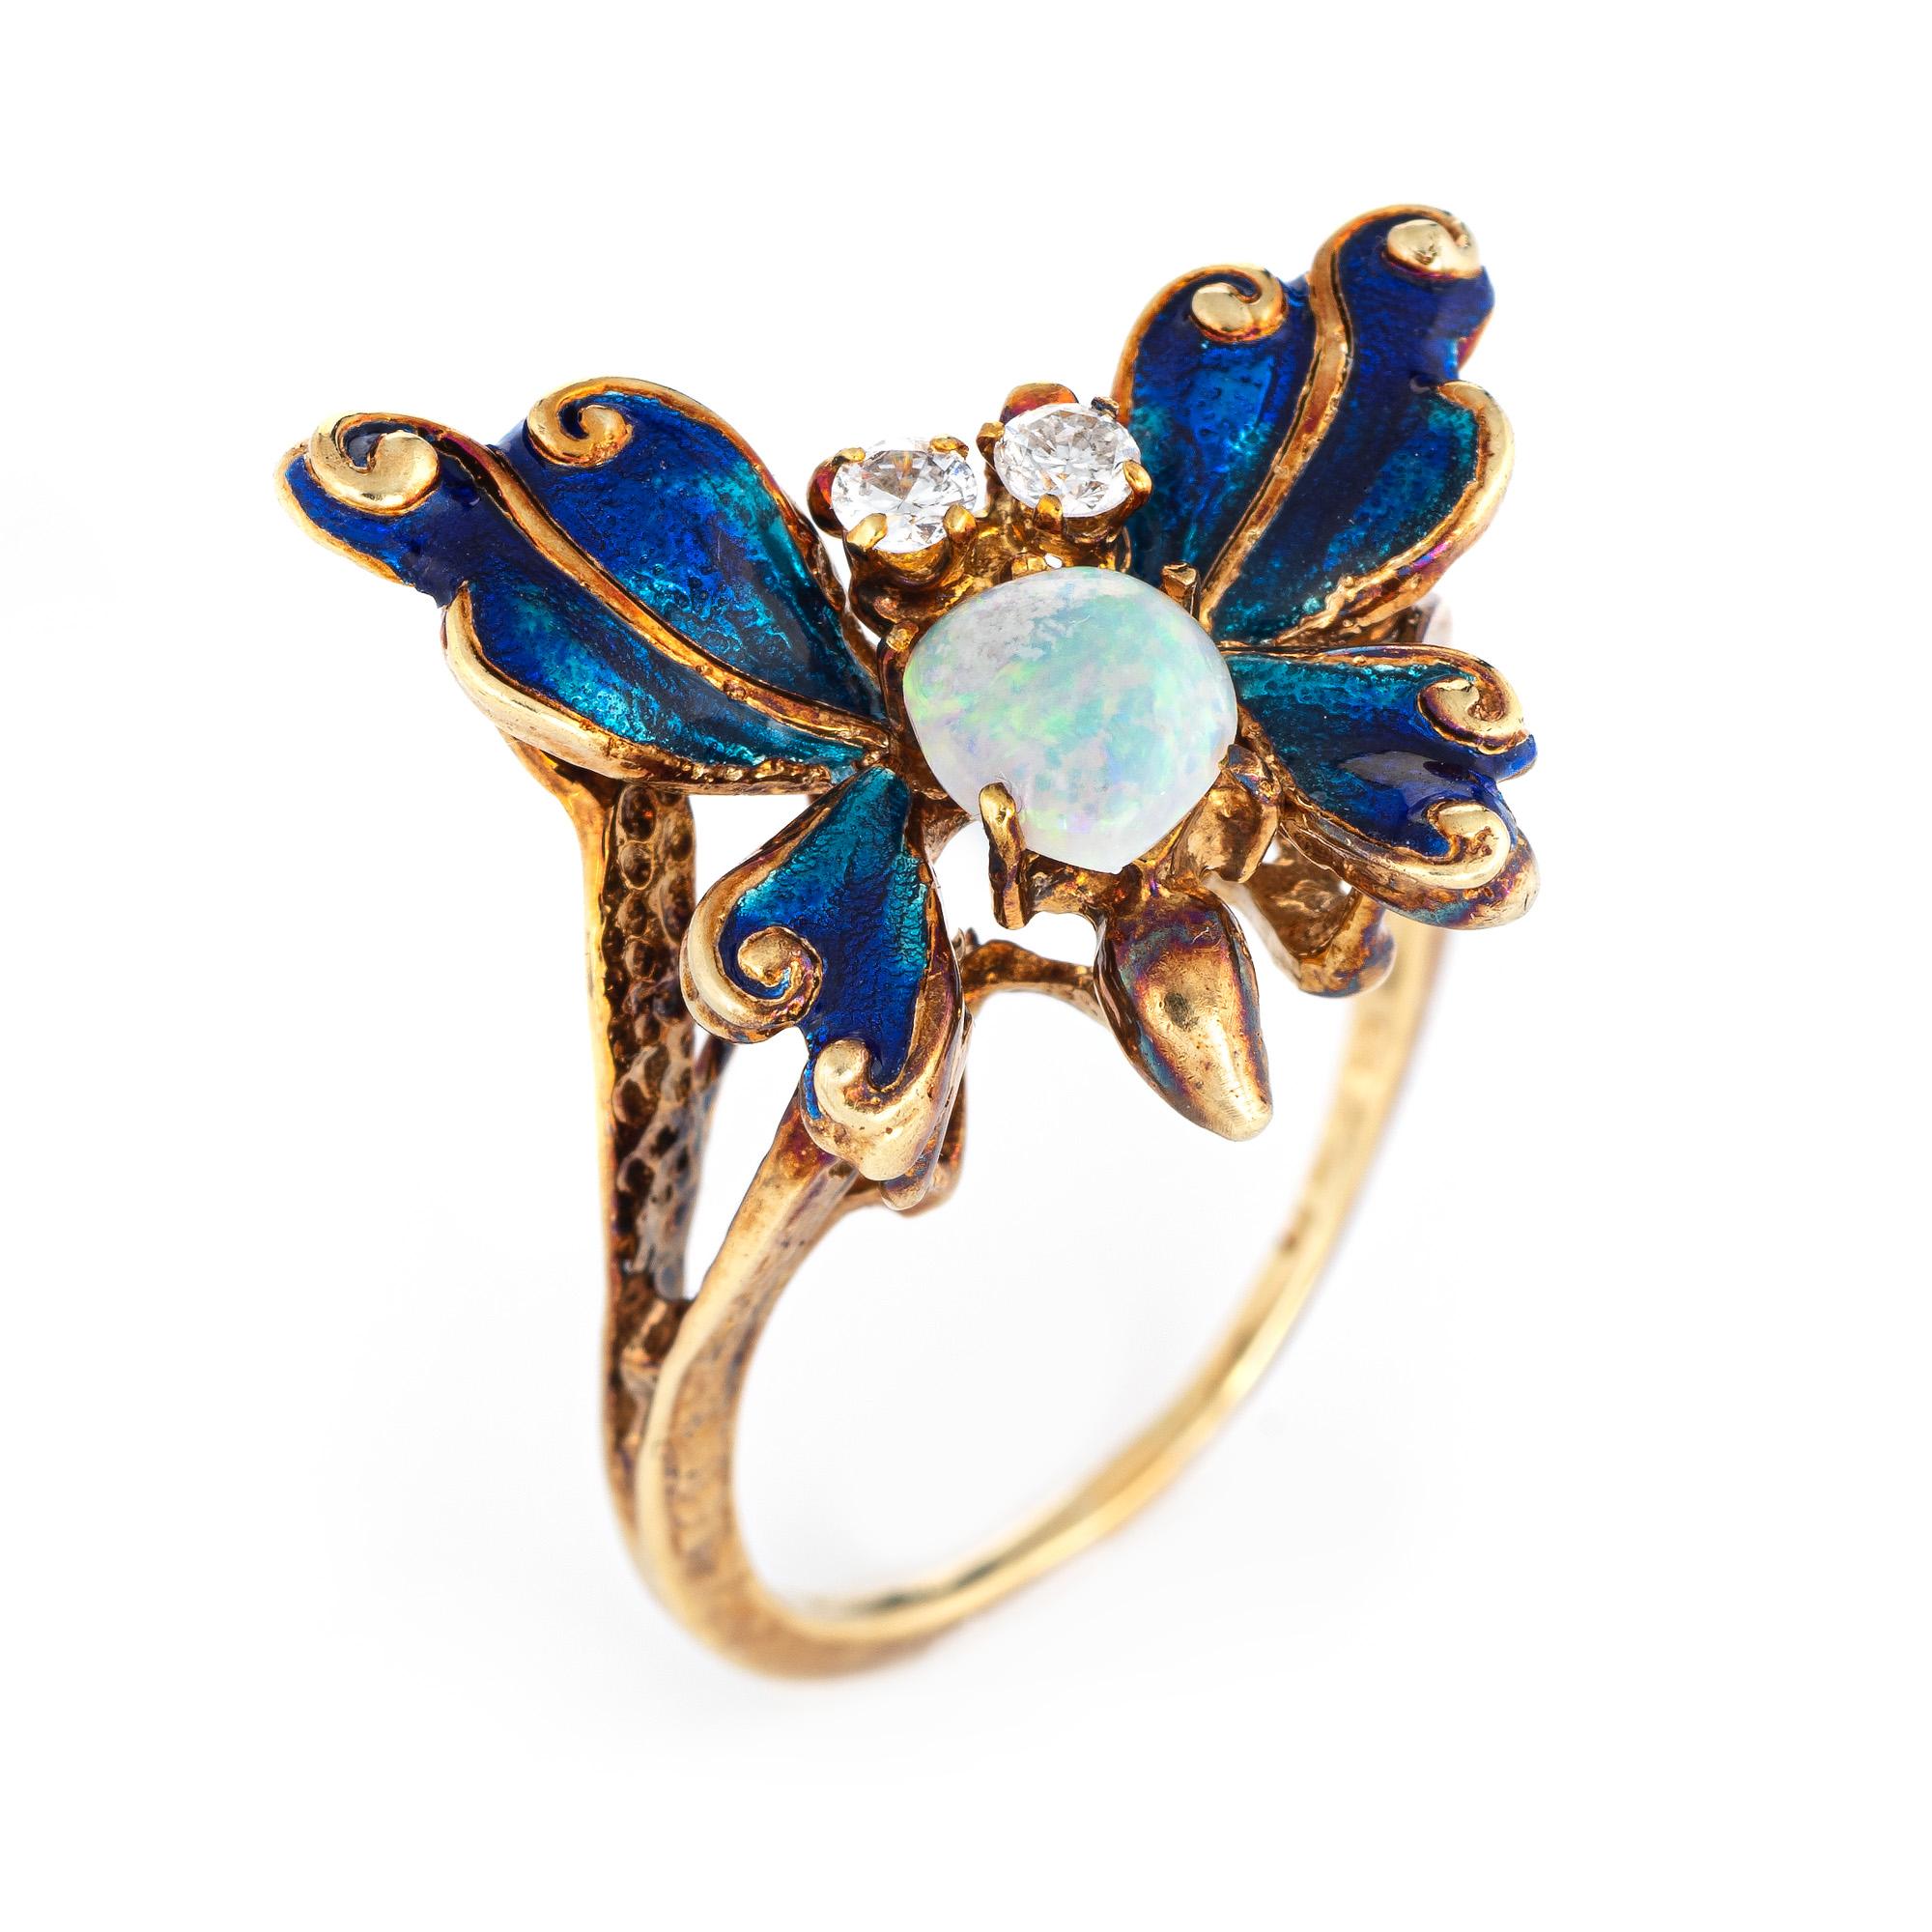 Stylish vintage butterfly cocktail ring (circa 1950s to 1960s) crafted in 14 karat yellow gold. 

Opal measures 6.5mm (estimated at 1 carat), accented with two estimated 0.05 carat diamonds. The total diamond weight is estimated at 0.10 carats